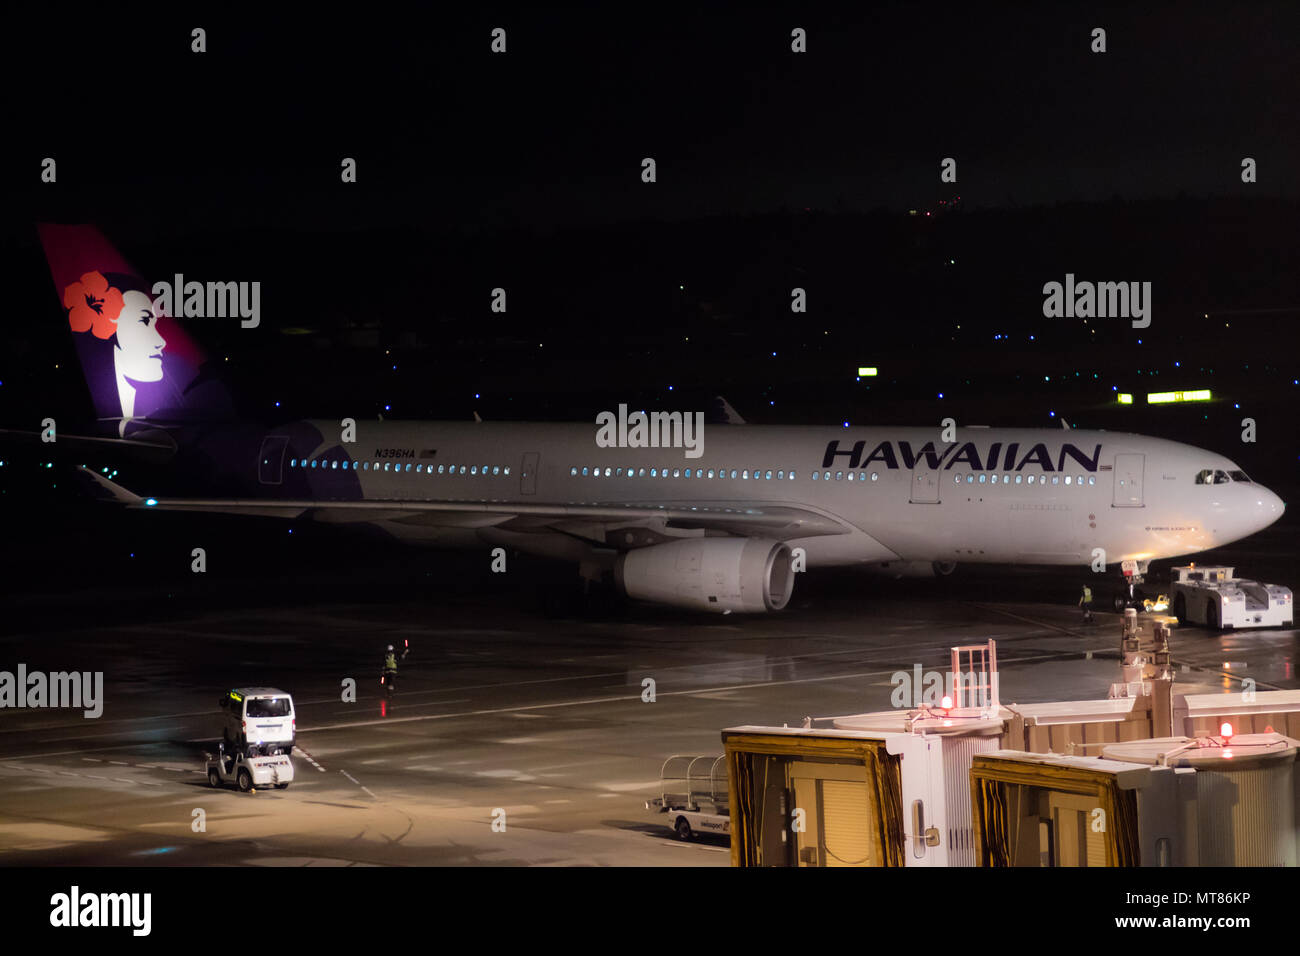 Tokyo, Japan - 08/01/2017: A Hawaiian Airline Airbus A330-200 taxiing in preparation for Take-off at night in Narita Airport. Stock Photo